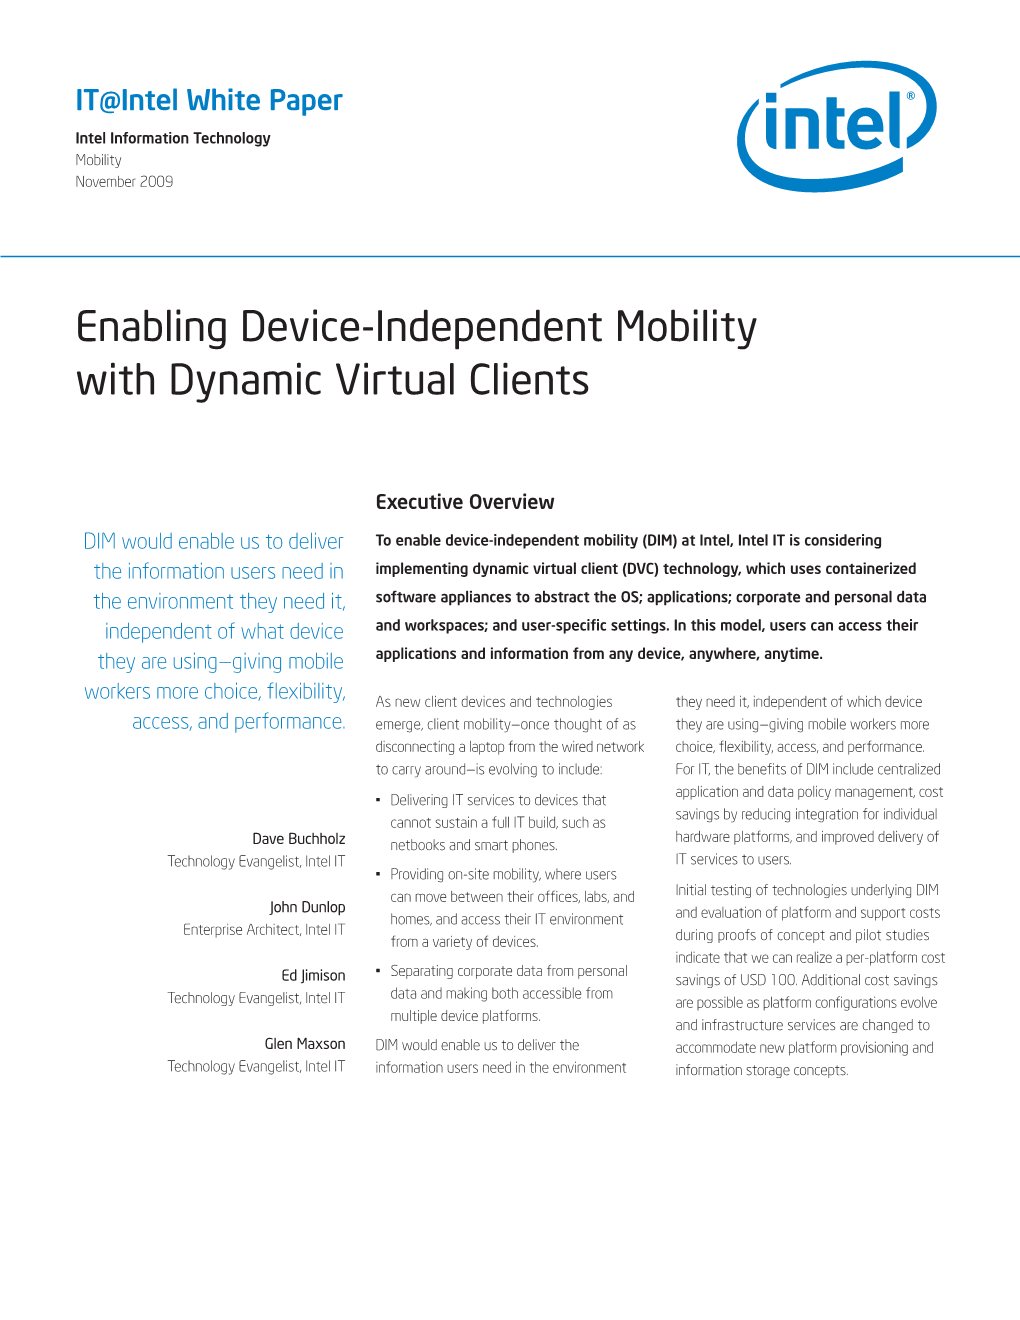 Enabling Device-Independent Mobility with Dynamic Virtual Clients